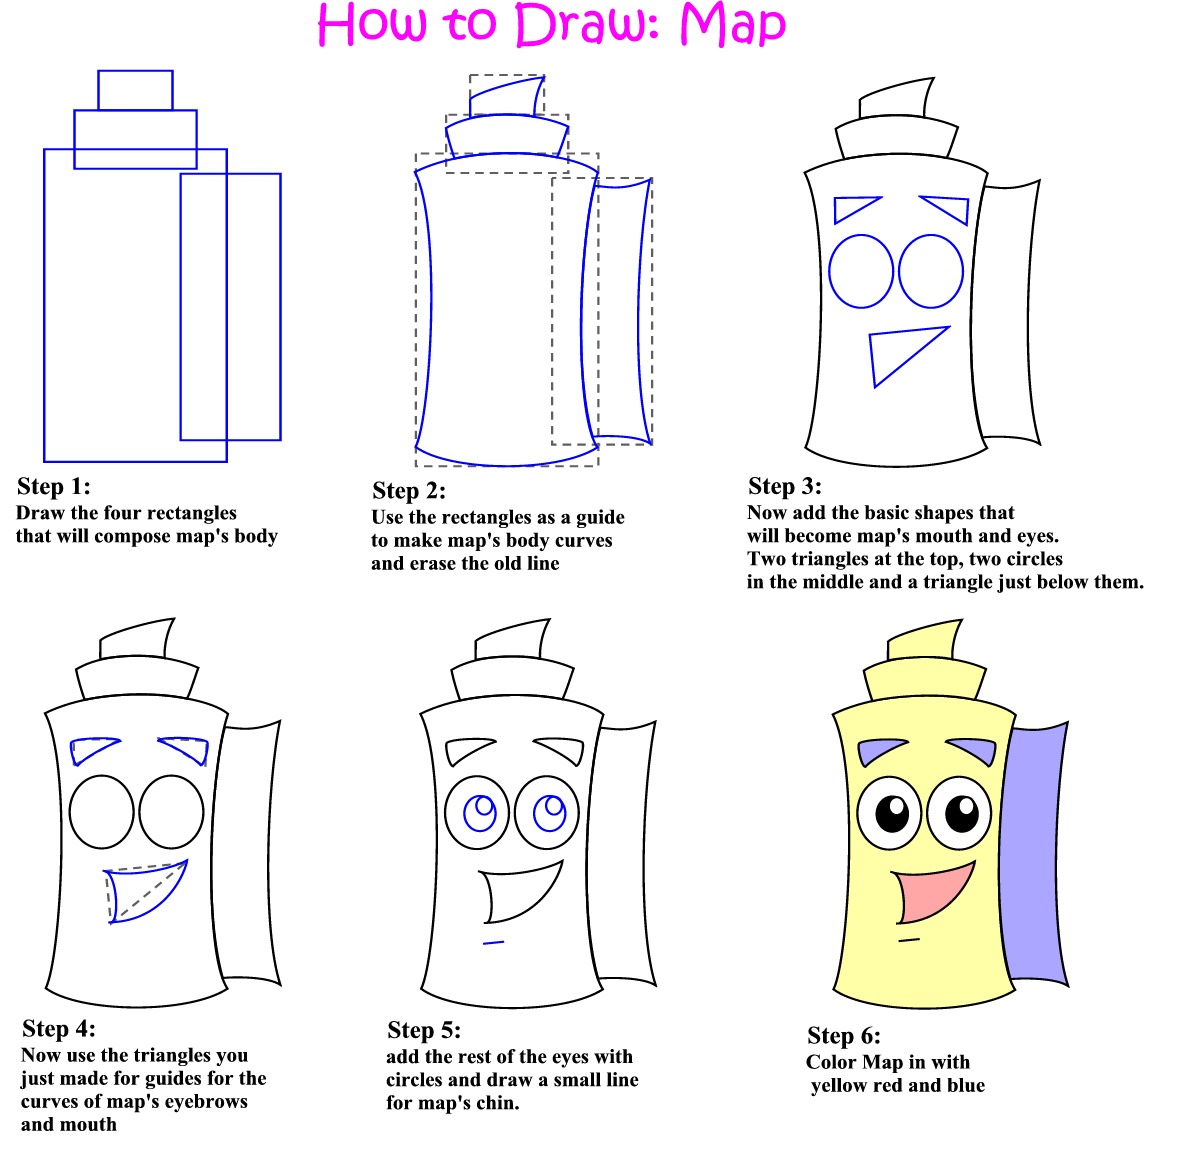 How to draw: map by Battou